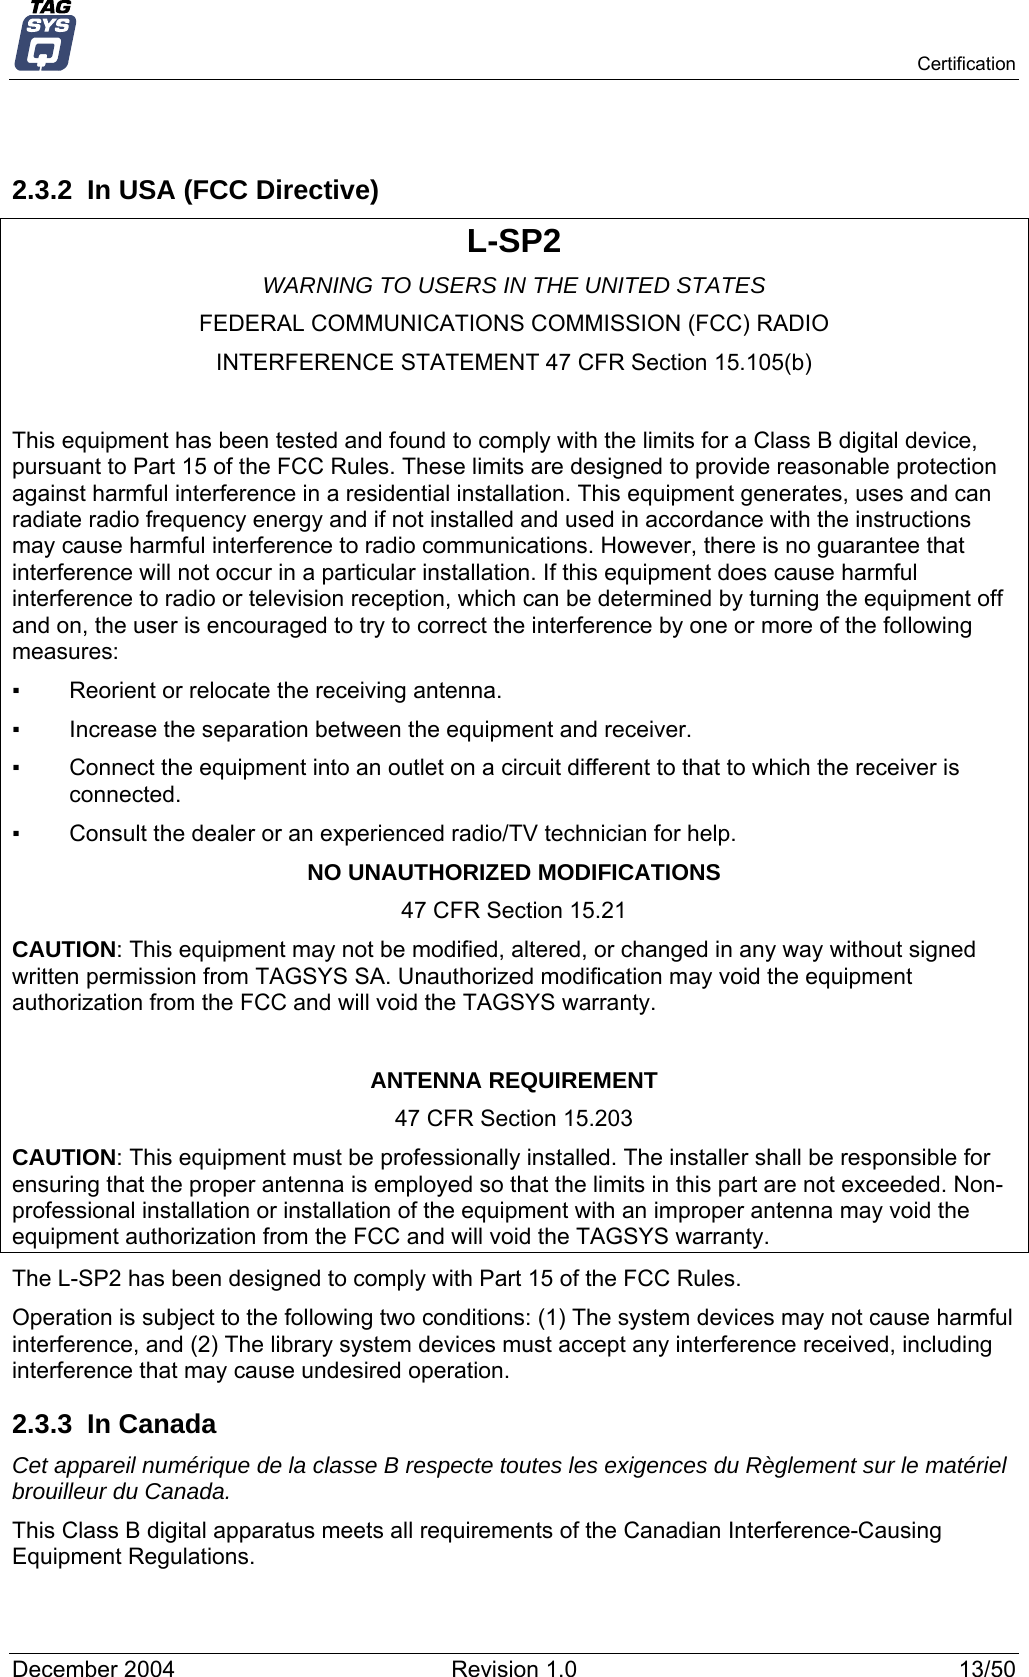   Certification  2.3.2  In USA (FCC Directive) L-SP2 WARNING TO USERS IN THE UNITED STATES FEDERAL COMMUNICATIONS COMMISSION (FCC) RADIO INTERFERENCE STATEMENT 47 CFR Section 15.105(b)  This equipment has been tested and found to comply with the limits for a Class B digital device, pursuant to Part 15 of the FCC Rules. These limits are designed to provide reasonable protection against harmful interference in a residential installation. This equipment generates, uses and can radiate radio frequency energy and if not installed and used in accordance with the instructions may cause harmful interference to radio communications. However, there is no guarantee that interference will not occur in a particular installation. If this equipment does cause harmful interference to radio or television reception, which can be determined by turning the equipment off and on, the user is encouraged to try to correct the interference by one or more of the following measures:  ▪   Reorient or relocate the receiving antenna. ▪   Increase the separation between the equipment and receiver. ▪   Connect the equipment into an outlet on a circuit different to that to which the receiver is connected. ▪   Consult the dealer or an experienced radio/TV technician for help. NO UNAUTHORIZED MODIFICATIONS 47 CFR Section 15.21 CAUTION: This equipment may not be modified, altered, or changed in any way without signed written permission from TAGSYS SA. Unauthorized modification may void the equipment authorization from the FCC and will void the TAGSYS warranty.  ANTENNA REQUIREMENT 47 CFR Section 15.203 CAUTION: This equipment must be professionally installed. The installer shall be responsible for ensuring that the proper antenna is employed so that the limits in this part are not exceeded. Non-professional installation or installation of the equipment with an improper antenna may void the equipment authorization from the FCC and will void the TAGSYS warranty. The L-SP2 has been designed to comply with Part 15 of the FCC Rules. Operation is subject to the following two conditions: (1) The system devices may not cause harmful interference, and (2) The library system devices must accept any interference received, including interference that may cause undesired operation. 2.3.3 In Canada Cet appareil numérique de la classe B respecte toutes les exigences du Règlement sur le matériel brouilleur du Canada. This Class B digital apparatus meets all requirements of the Canadian Interference-Causing Equipment Regulations. December 2004  Revision 1.0  13/50 